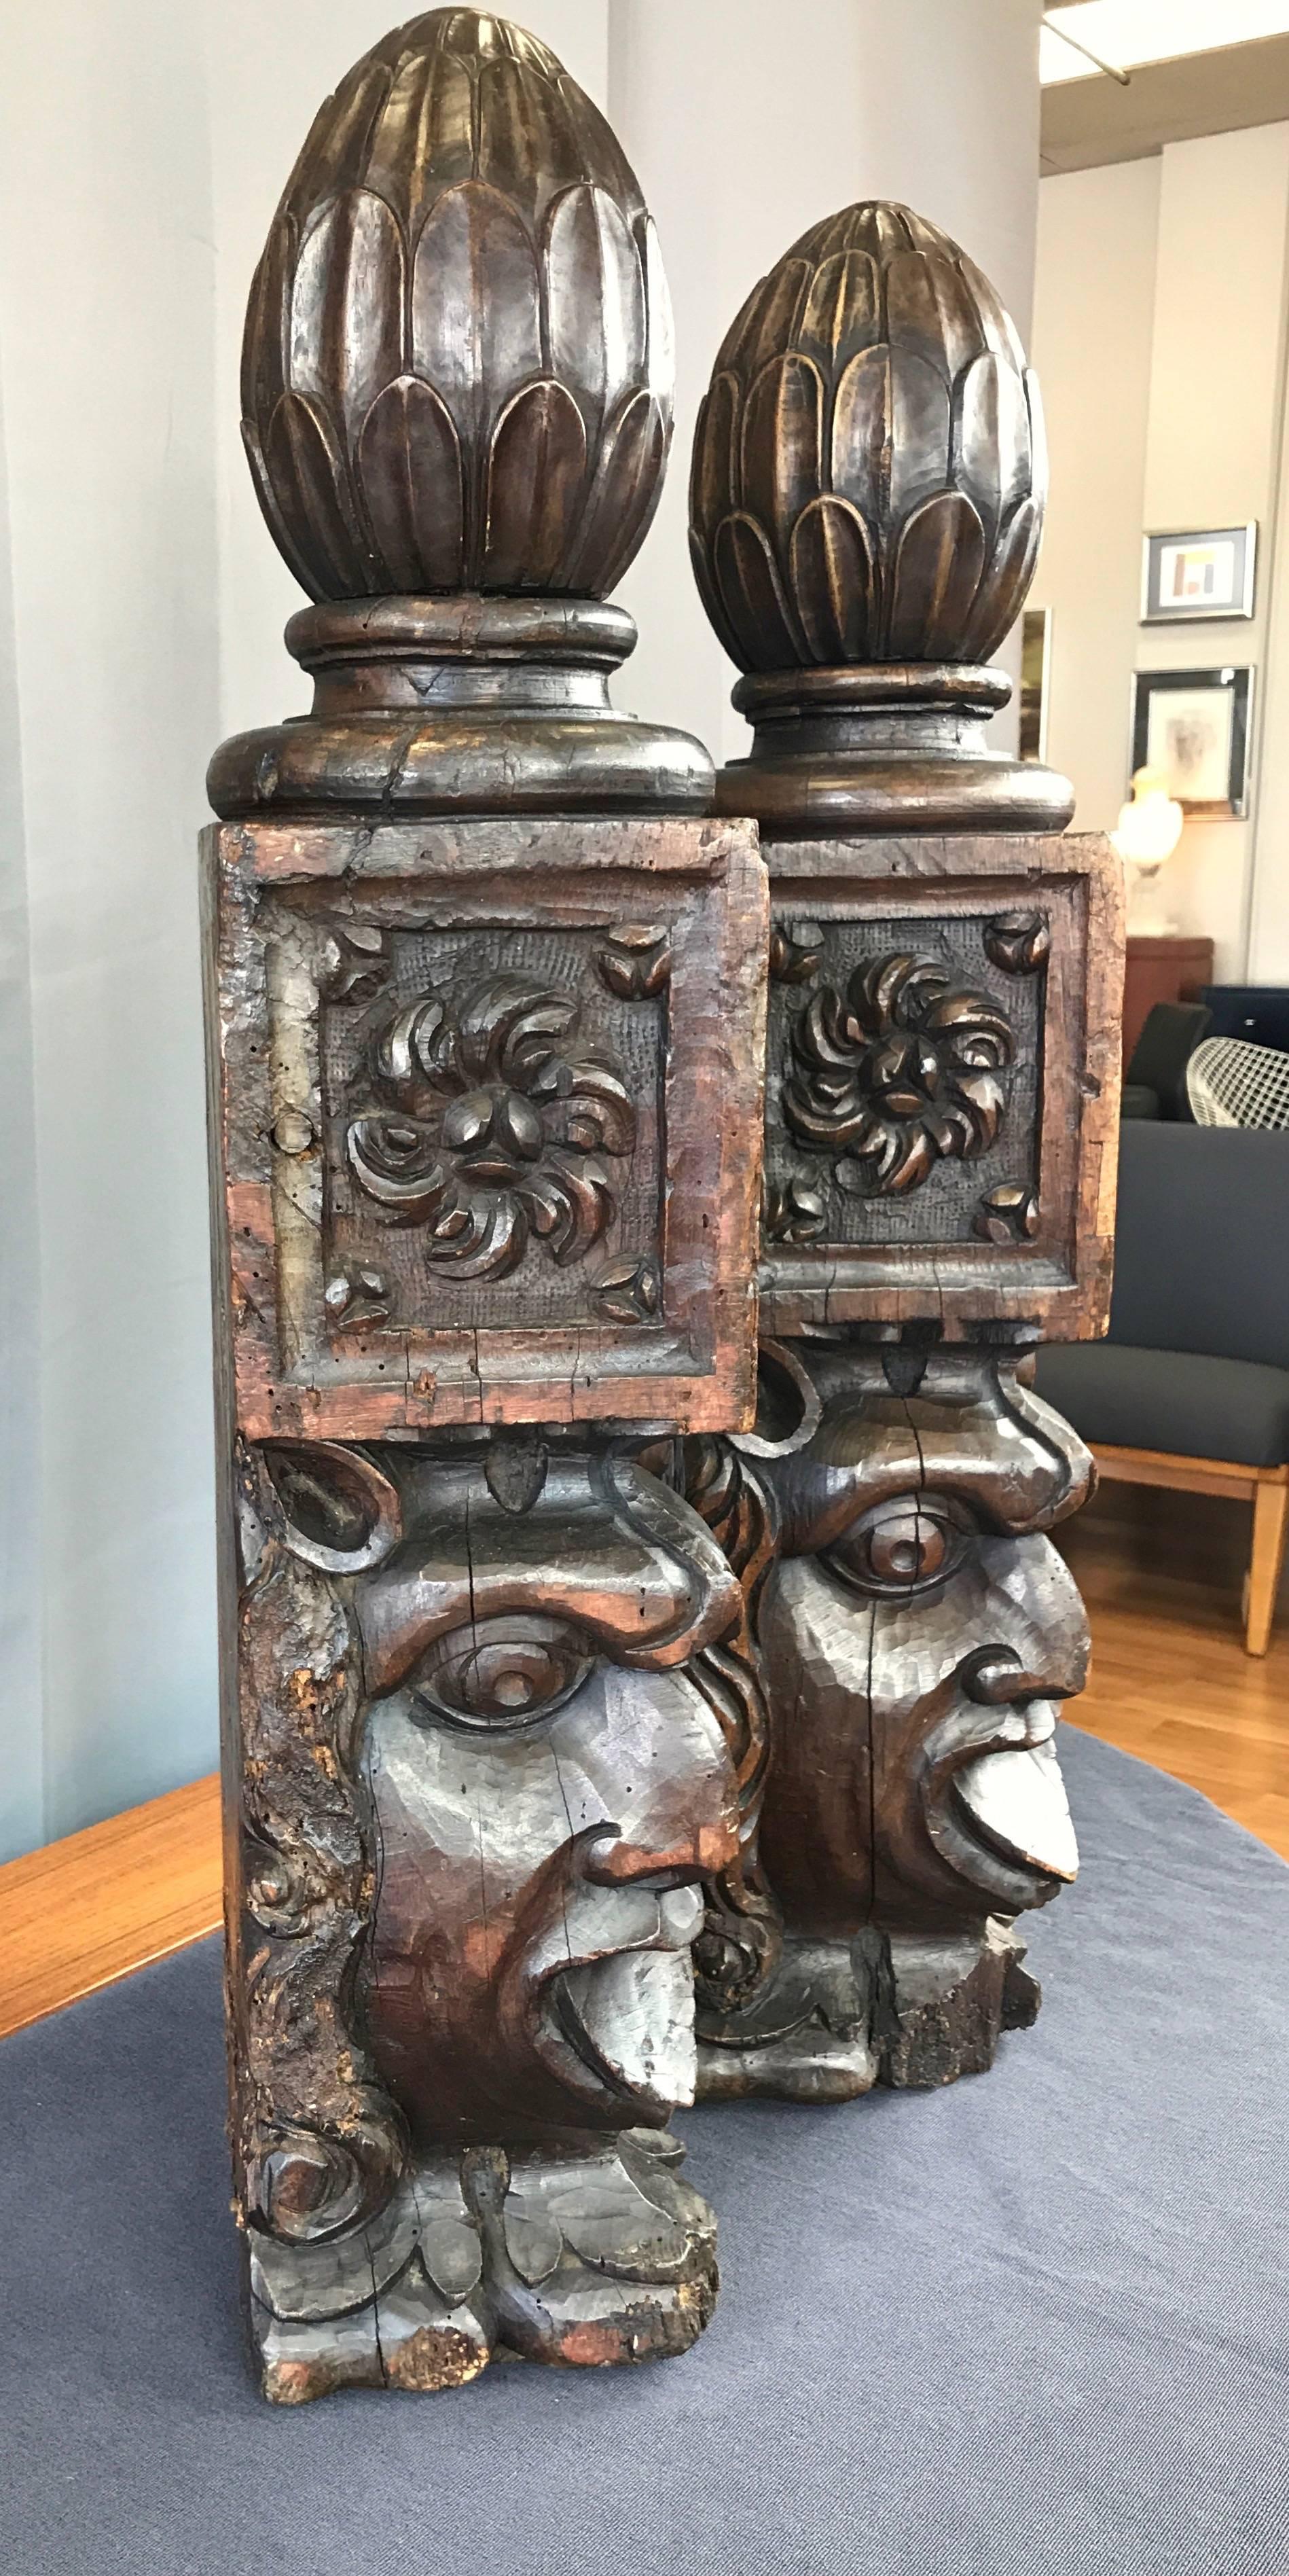 A pair of exceptionally large and expressive hand-carved solid mahogany newel posts from the early 1800s.

Of European origin, their uniquely commanding and captivating visage calls to mind a medieval-era gargoyle or a Maori warrior performing an